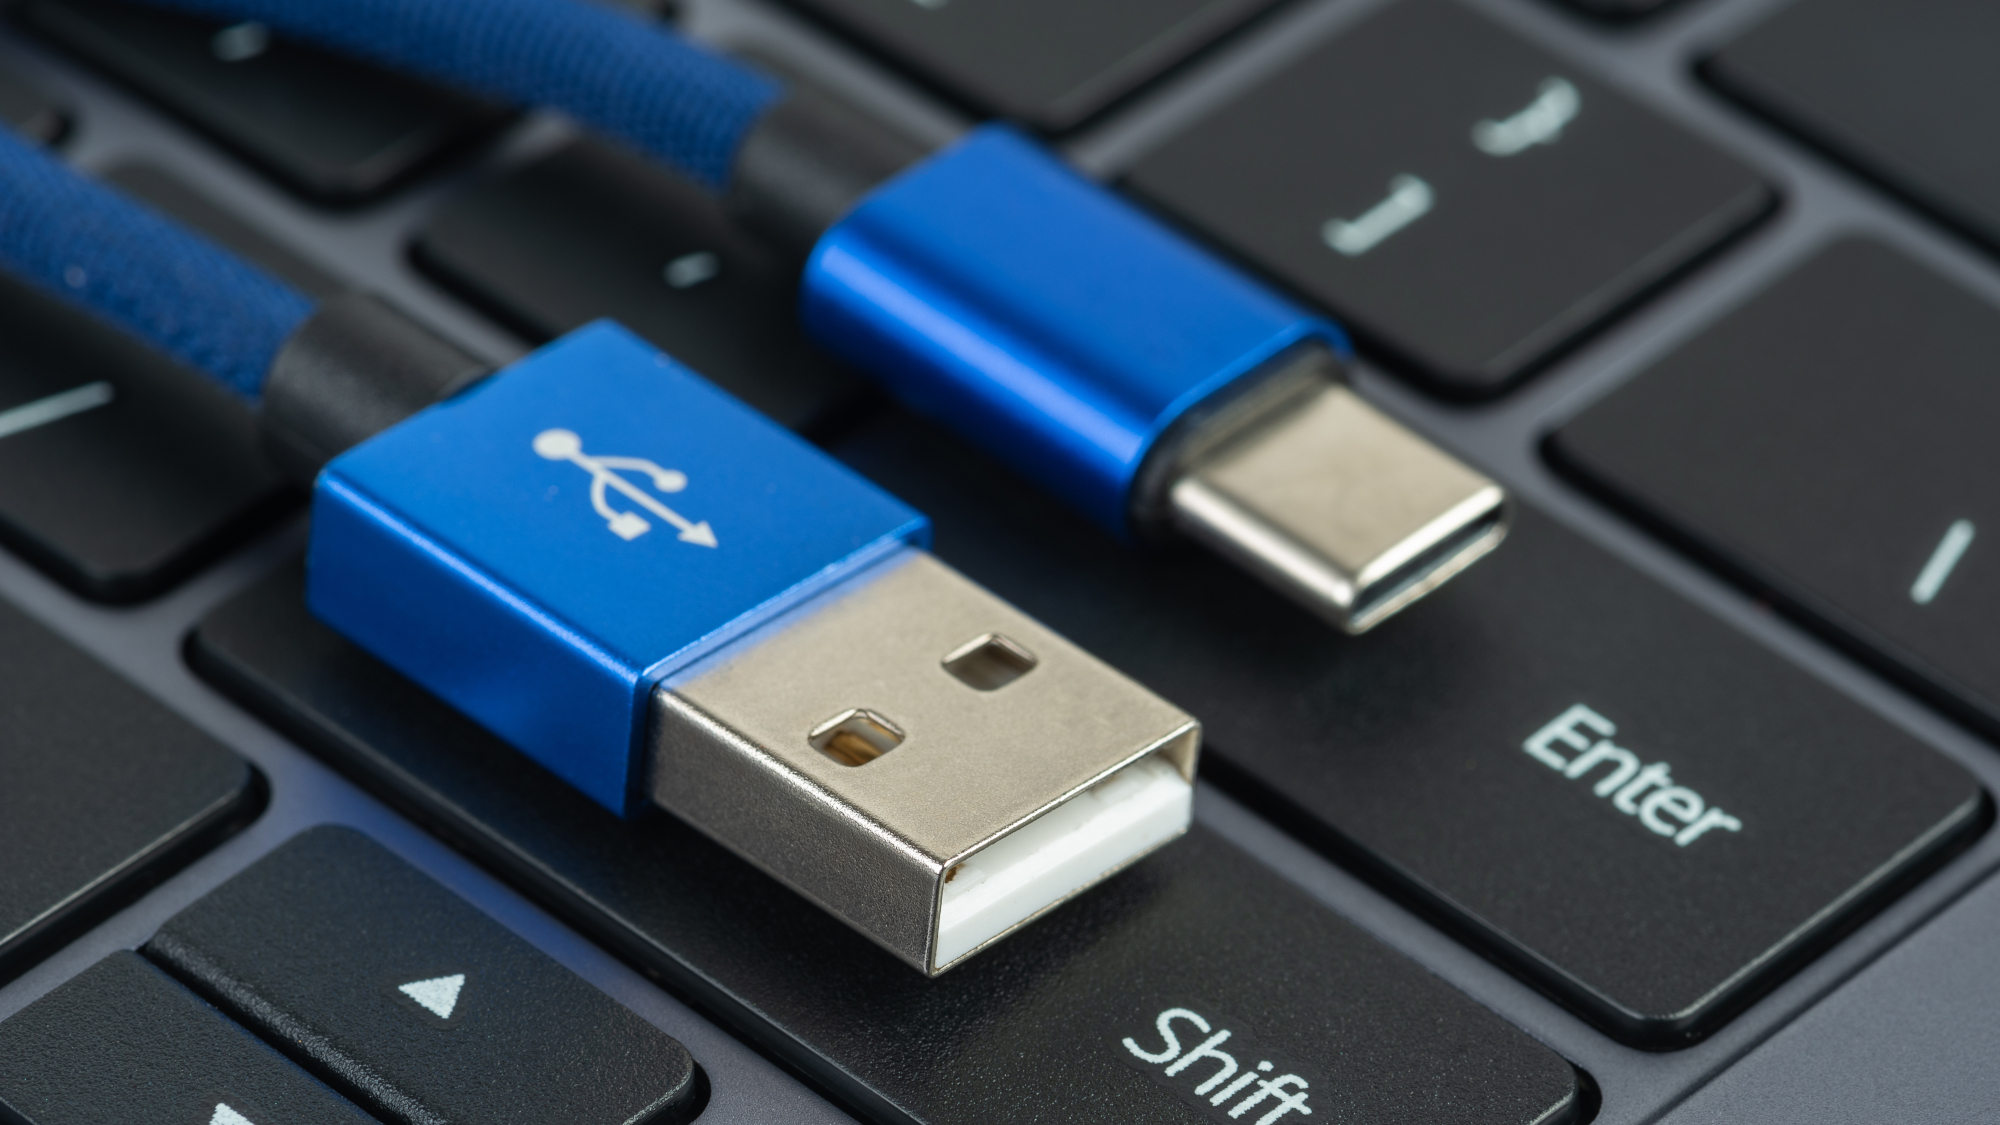 What Is USB-C? a Guide to the USB Cable Type